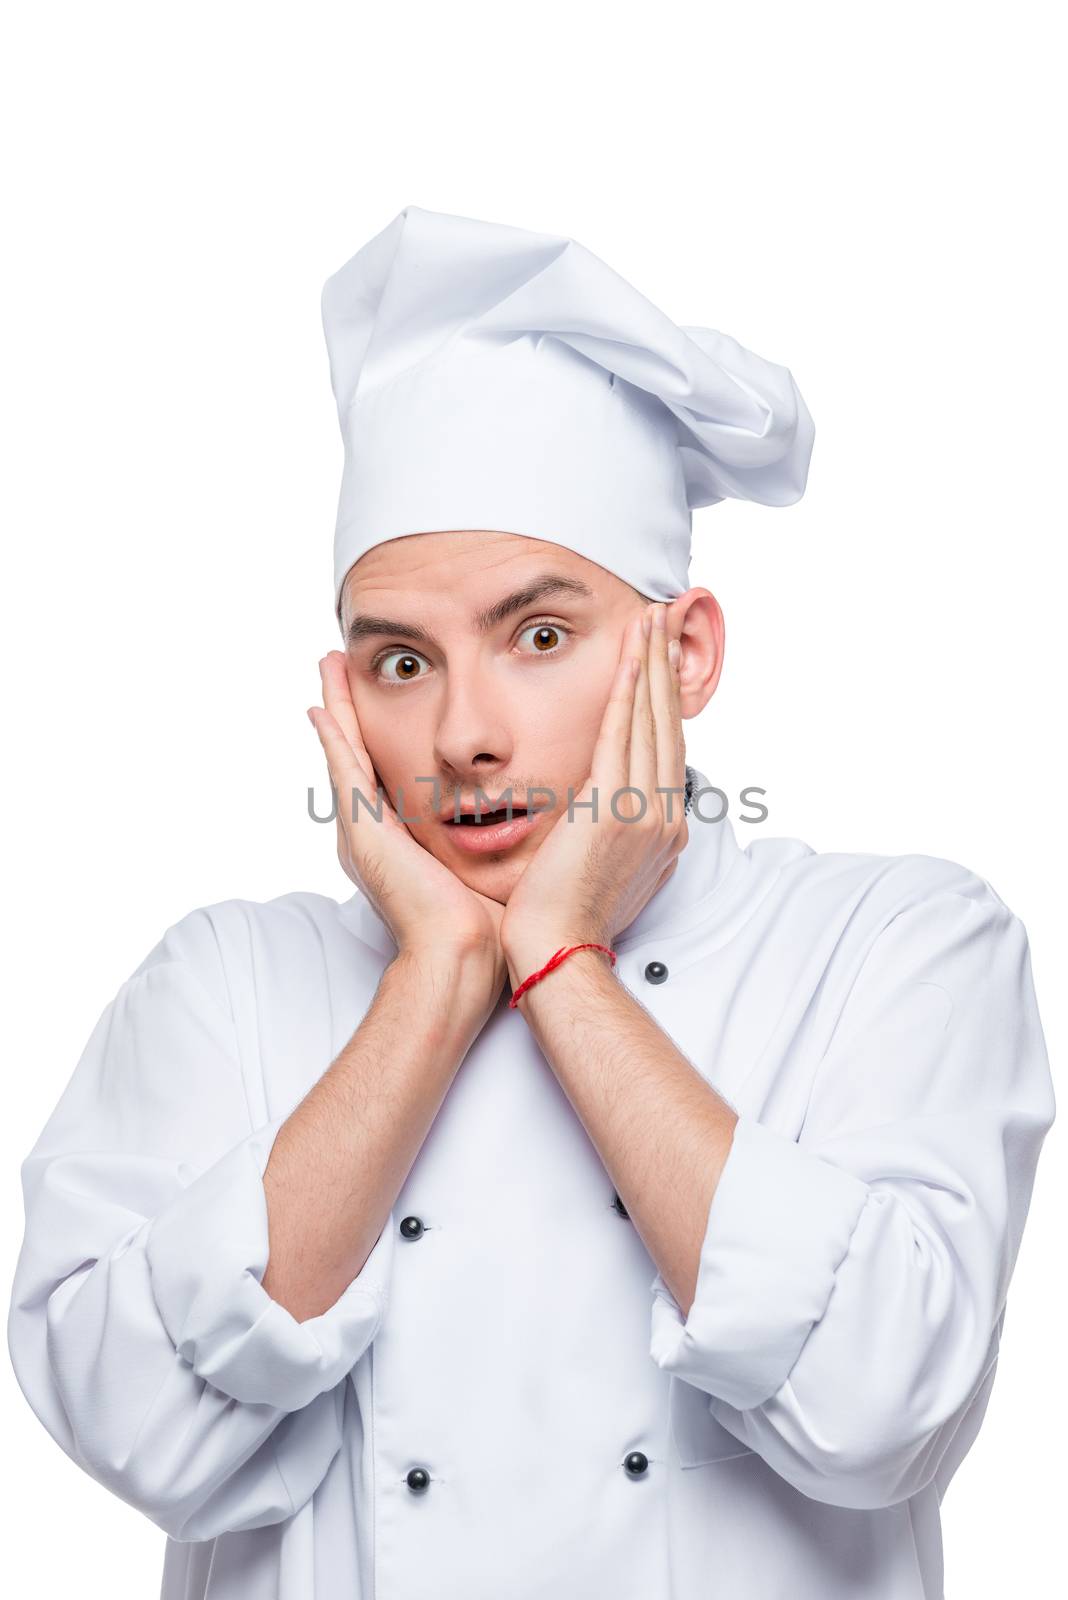 surprised and shocked chef, emotional male portrait on white bac by kosmsos111